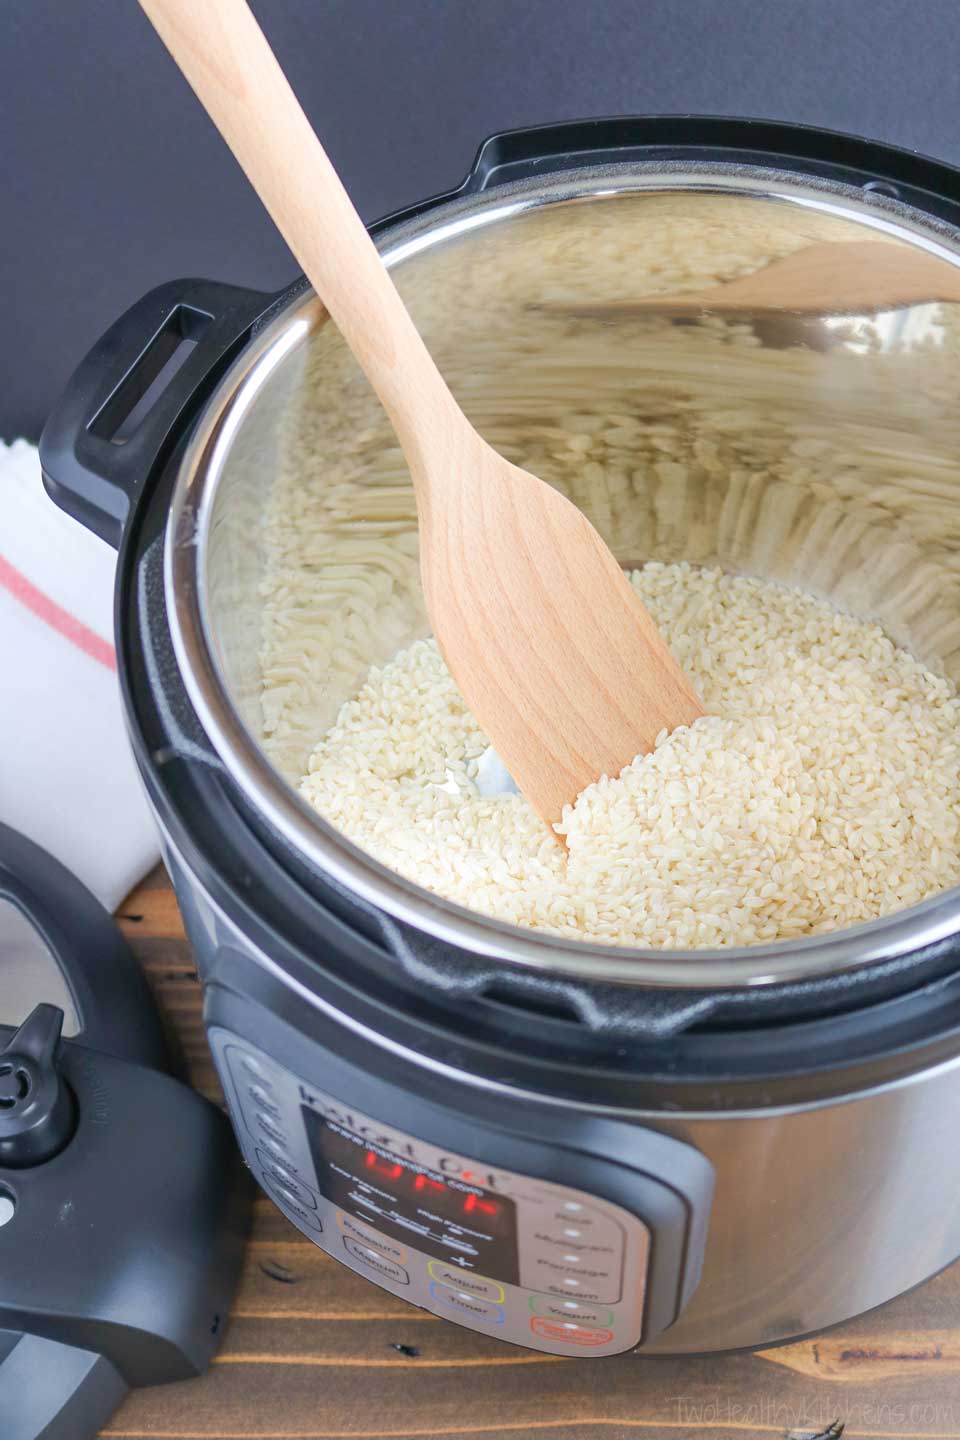 One of the things that Instant Pots can cook is rice. In fact, Instant Pots come with a “Rice” button specifically for the function of serving as a rice cooker. But what else do you do with an Instant Pot? We’ve got lots of ideas to help you get the most out of your electric pressure cooker, and maybe even to help you decide if you should buy an Instant Pot in the first place! | #InstantPot #pressurecooker #pressurecooking #slowcooker | www.TwoHealthyKitchens.com